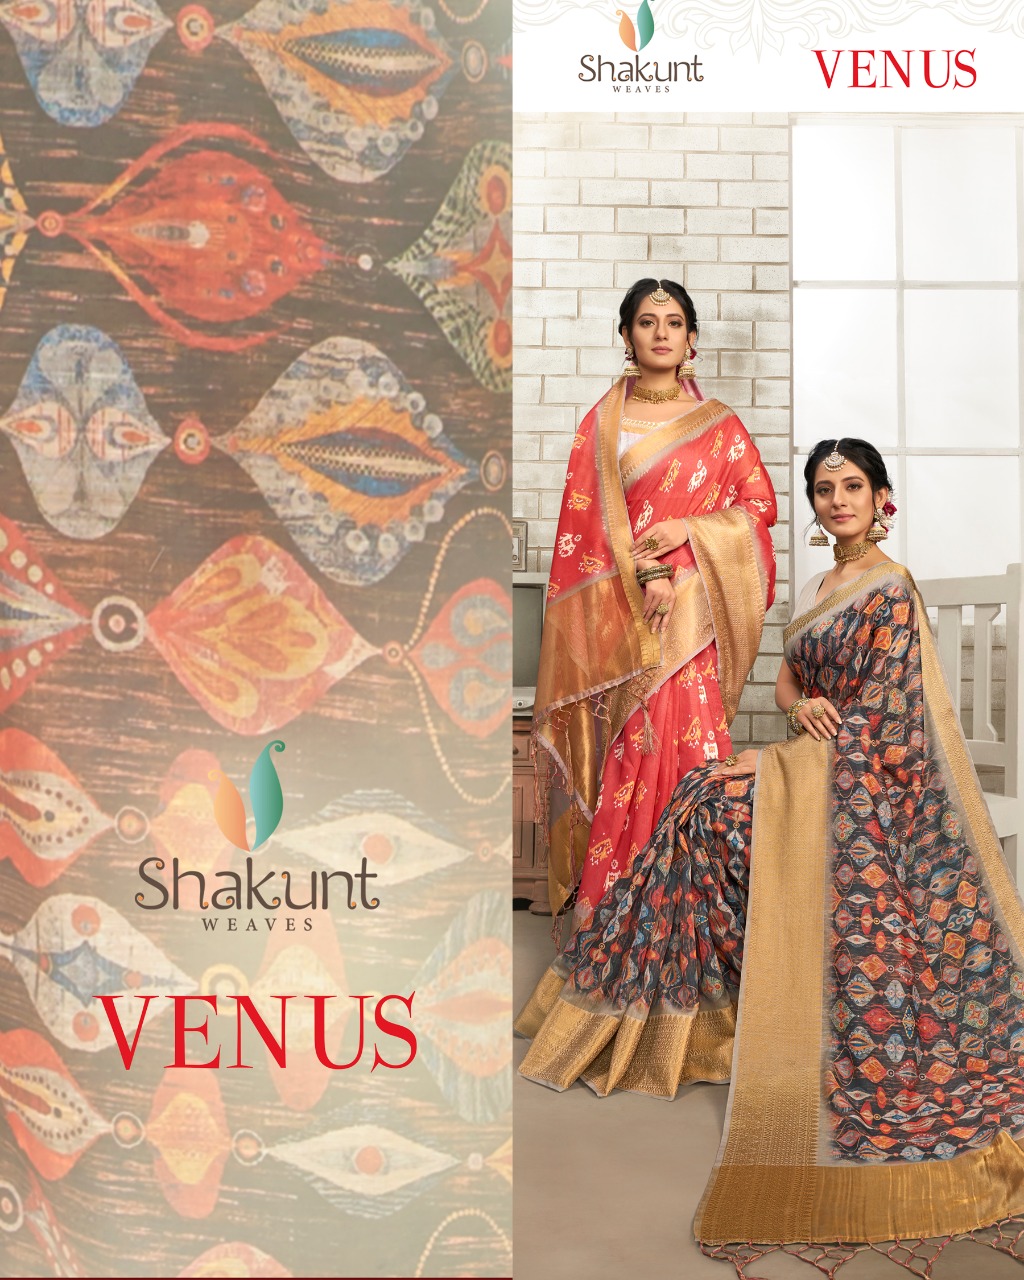 Shakunt Weaves Venus Printed Fancy Fabric Sarees Collection ...